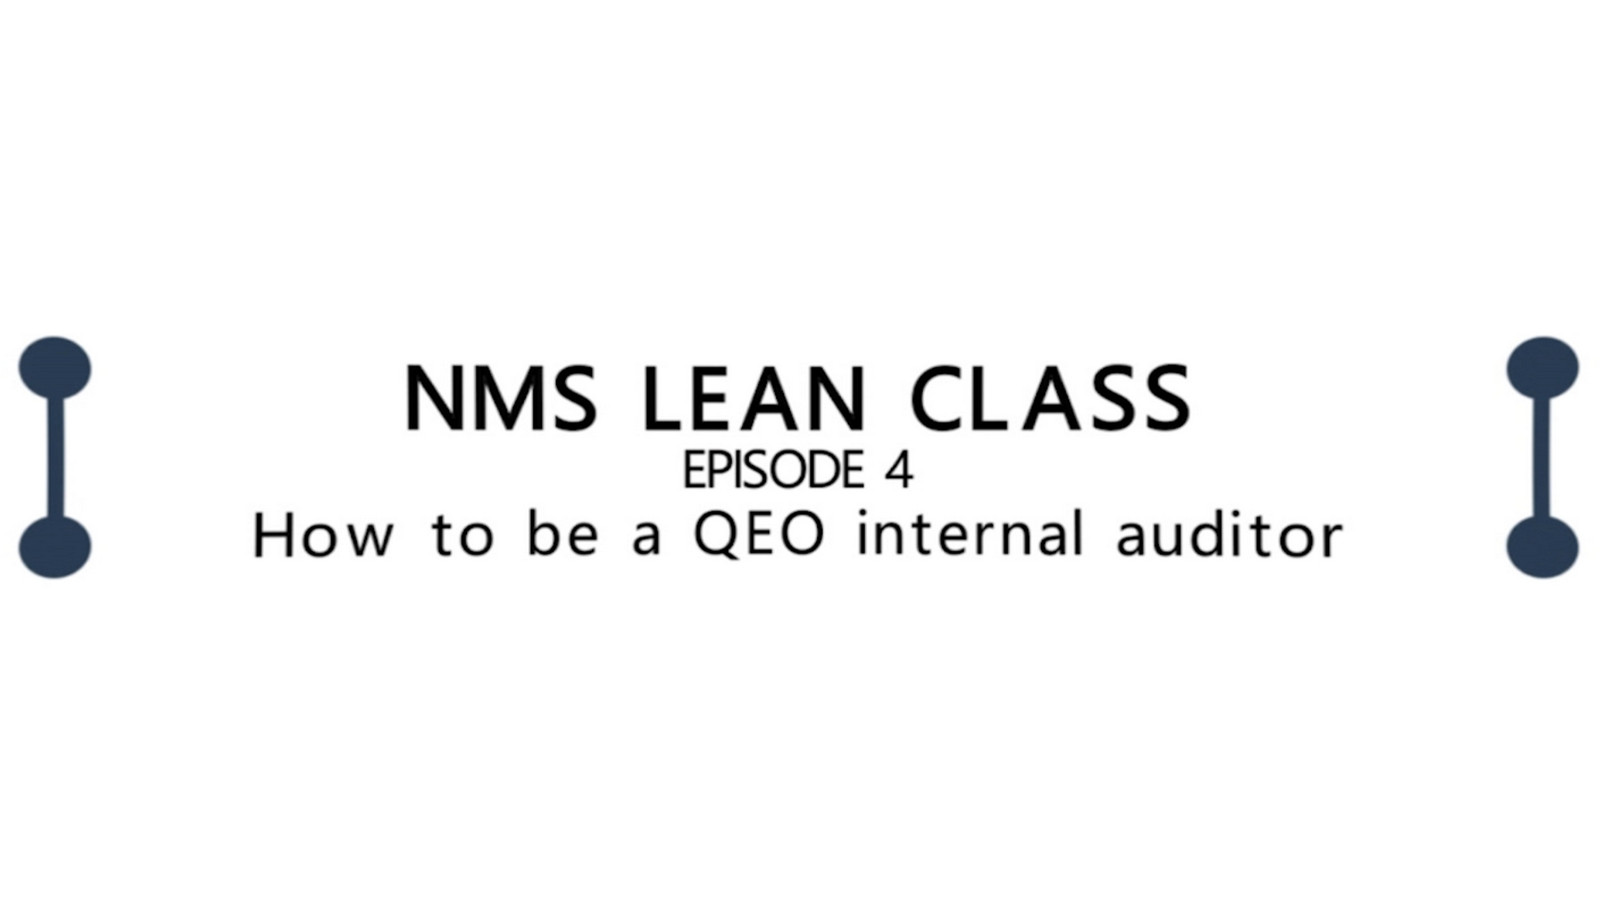 NMS Learn Class Episode 4